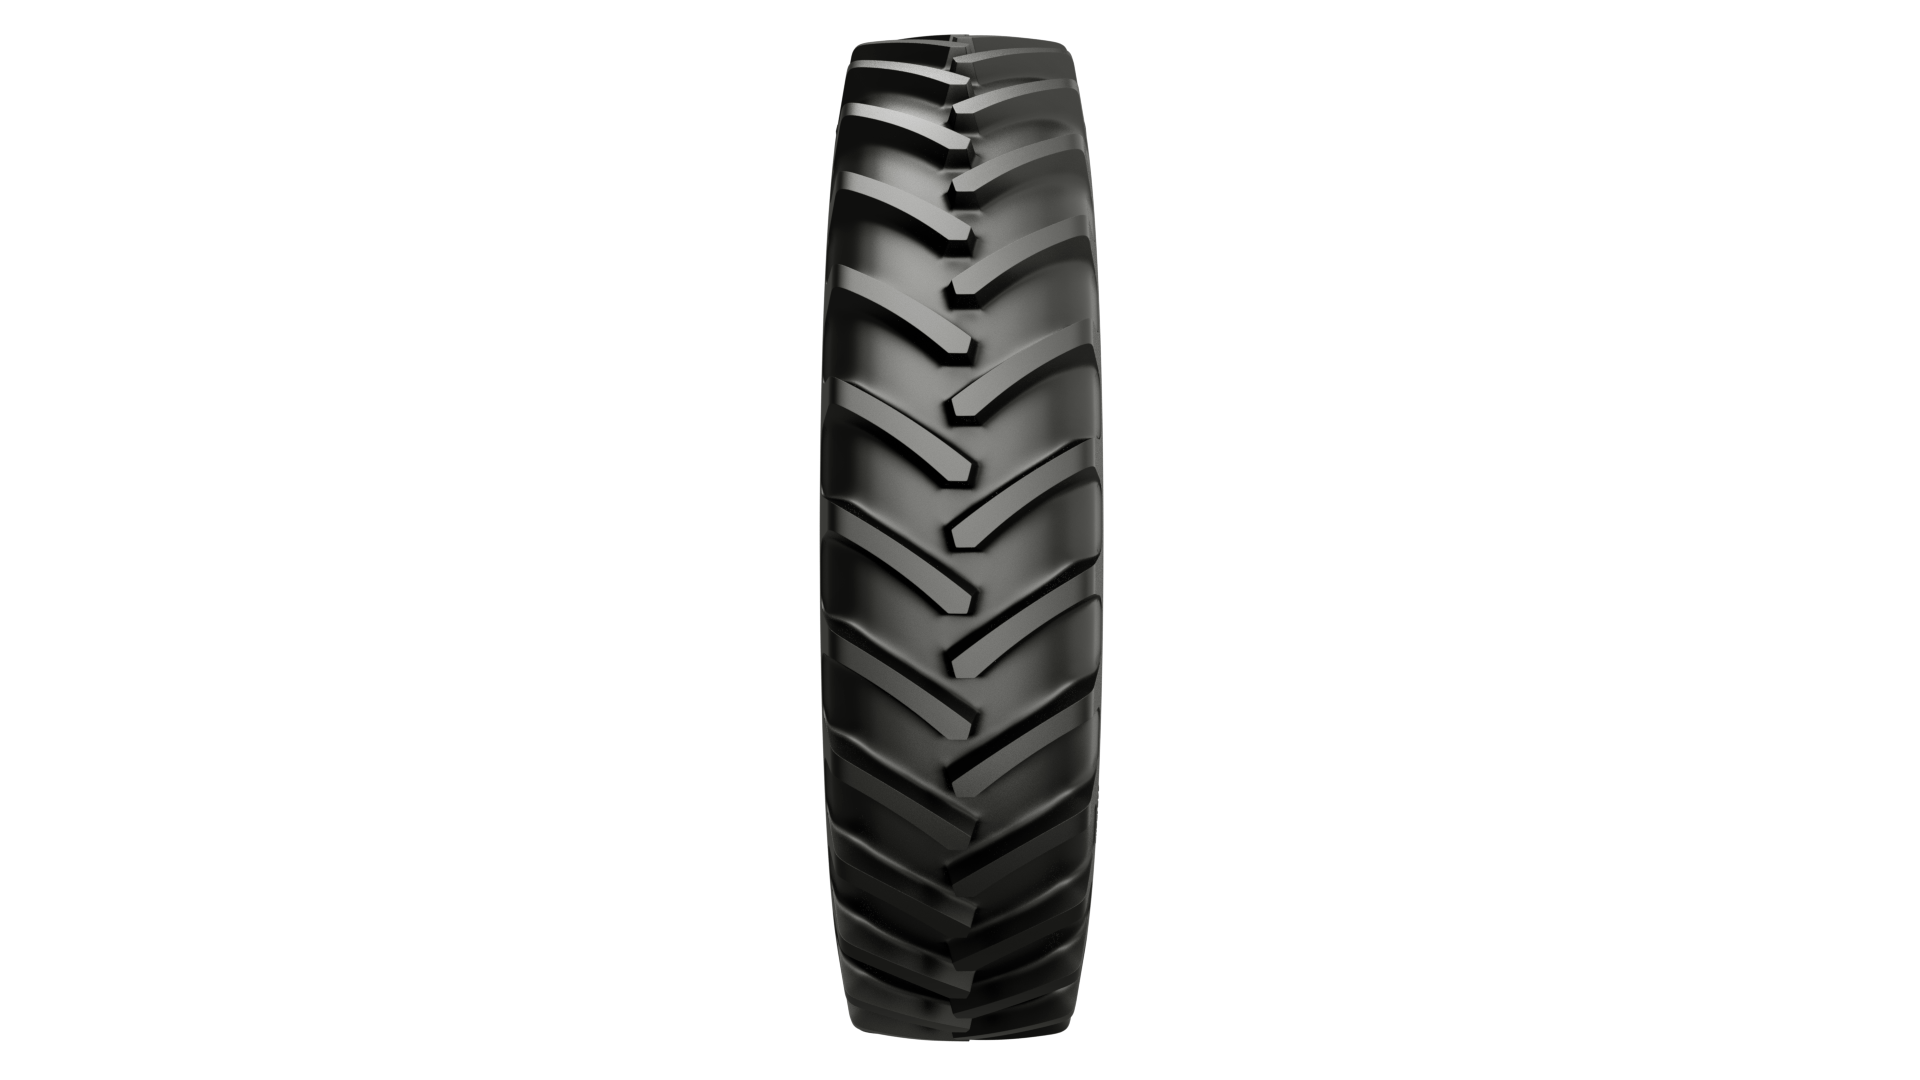 Earth Pro RC GALAXY AGRICULTURE Tire